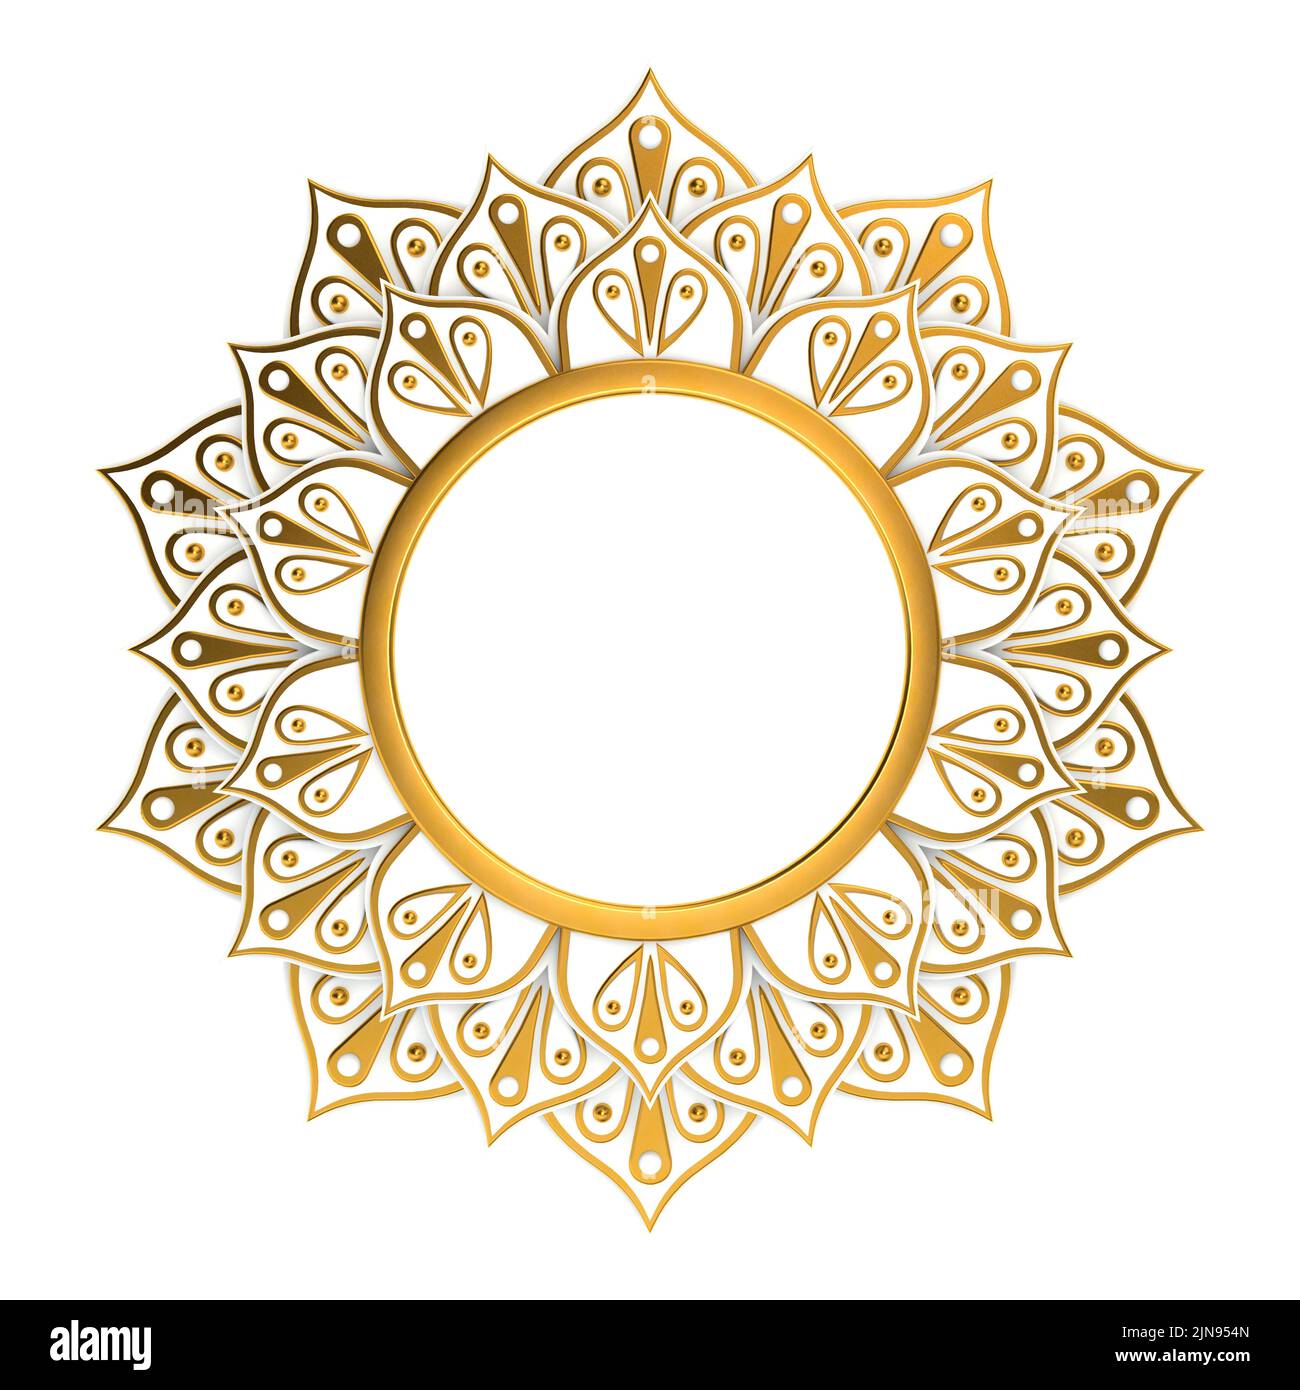 3d render white and gold abstract frame. Golden mandala isolated on white. Stock Photo